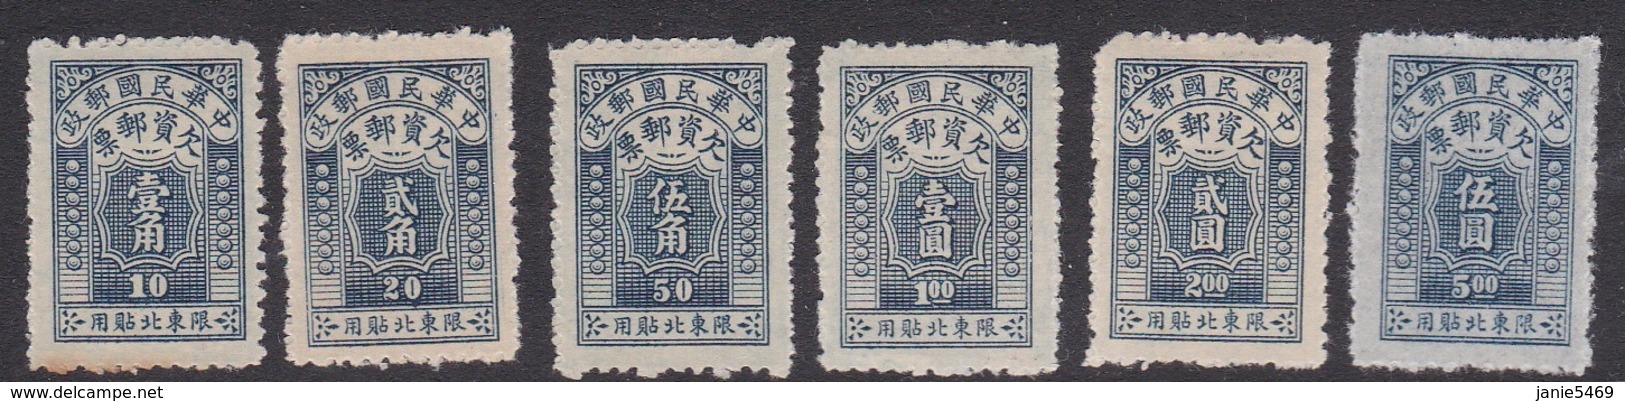 China North-Eastern Provinces  SG D48-53 1947 Postage Due, Mint - North-Eastern 1946-48